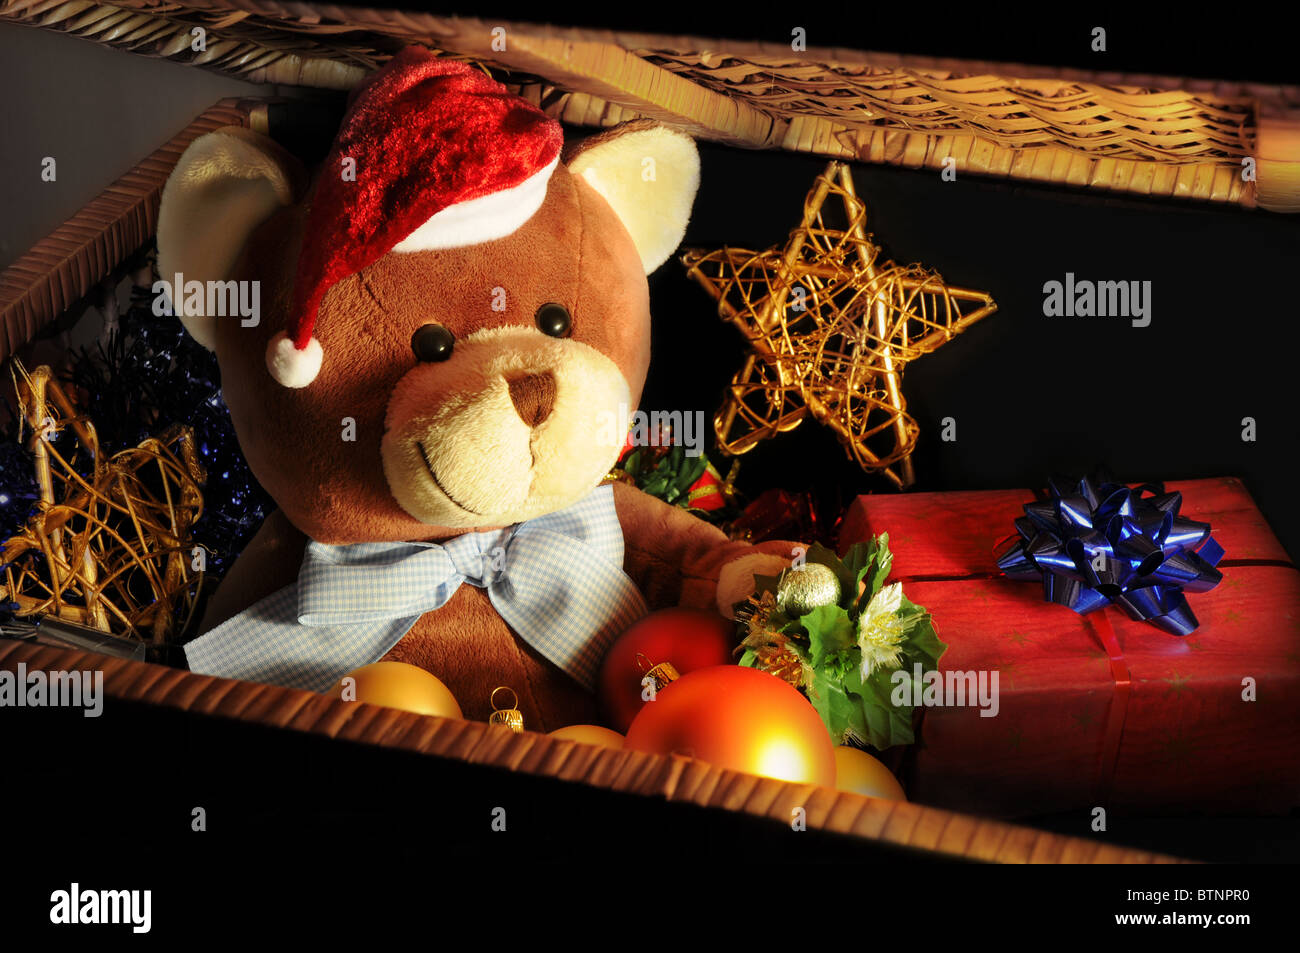 Christmas expectations concept - teddy bear in a chest with Christmas decoration and gifts. Stock Photo